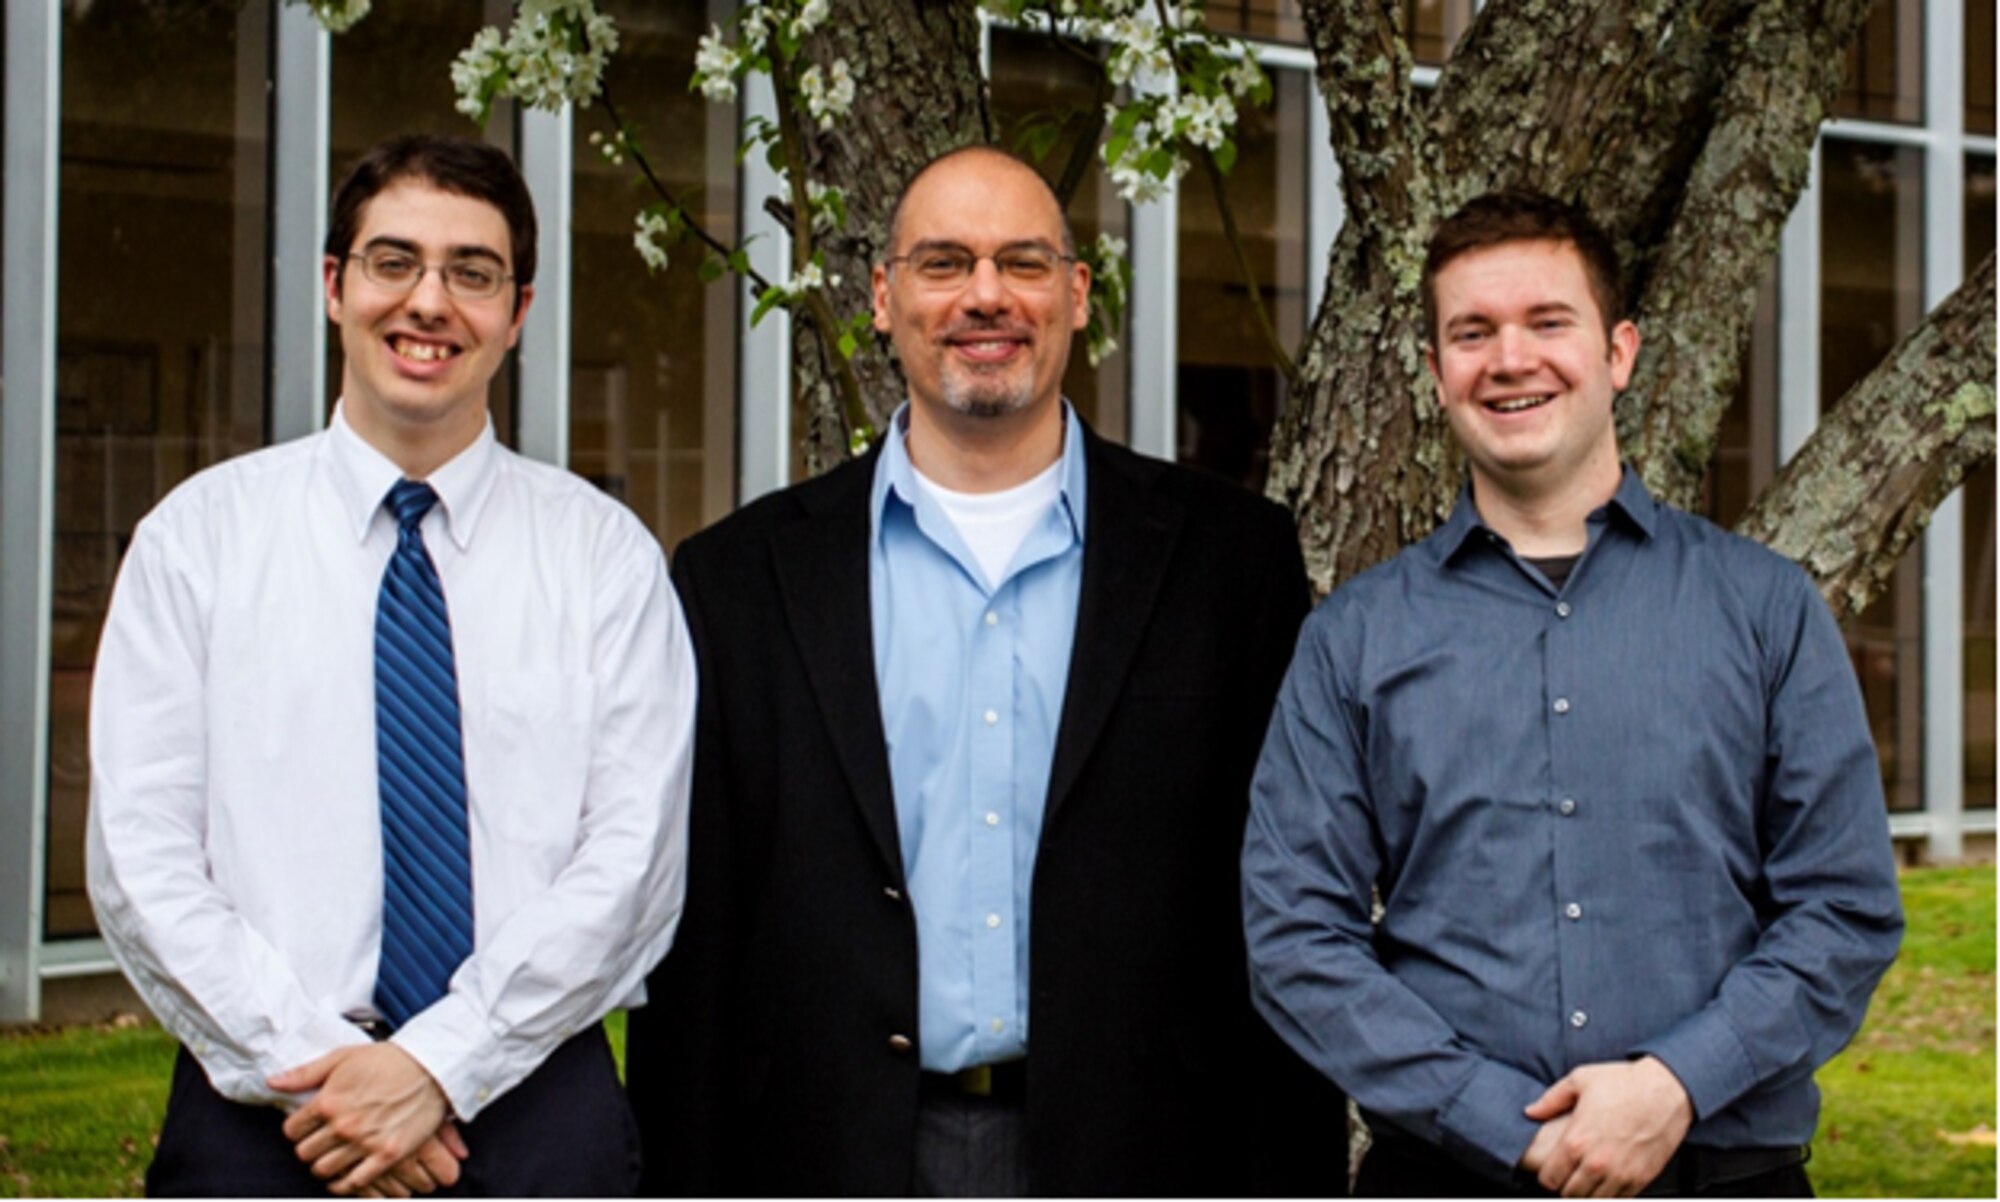 Pictured above, from left to right, are Dimitrios A. Kakavelakis, III, Dr. Joseph Majdalani, UTSI’s H.H. Arnold Chair of Excellence in Advanced Propulsion and professor of mechanical and aerospace engineering, and AEDC’s Andrew Fist. A technical paper authored by Fist and Majdalani took first place at the recent Masters Division of the 64th American Institute of Aeronautics and Astronautics [AIAA] Southeastern Regional Conference in Raleigh, N.C. A technical paper authored by Kakavelakis and Majdalani took second place in the same competition. (Photo provided)